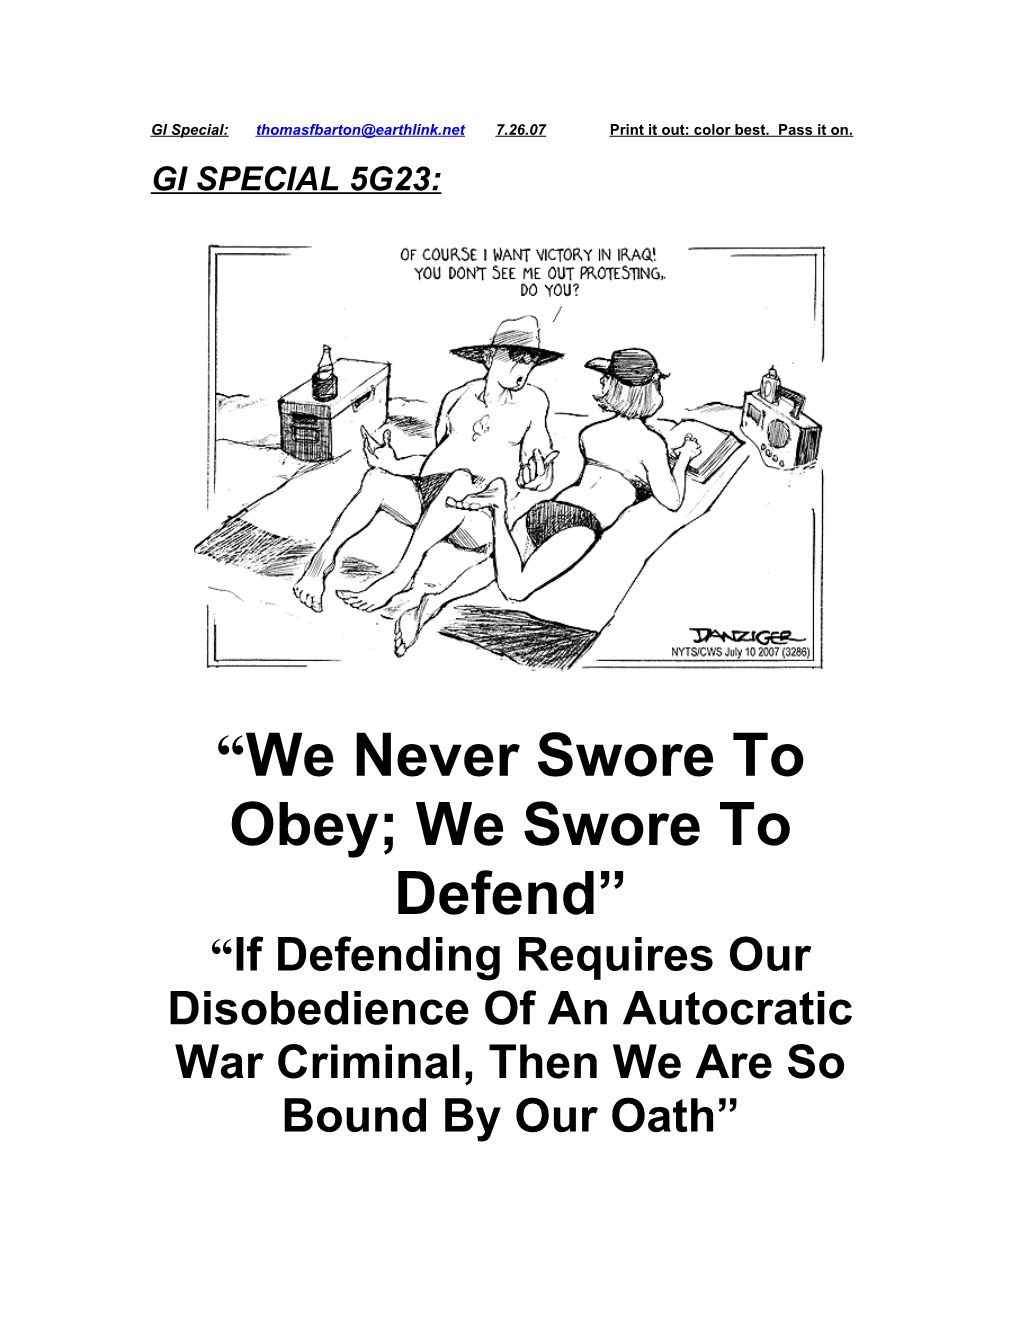 We Never Swore to Obey; We Swore to Defend